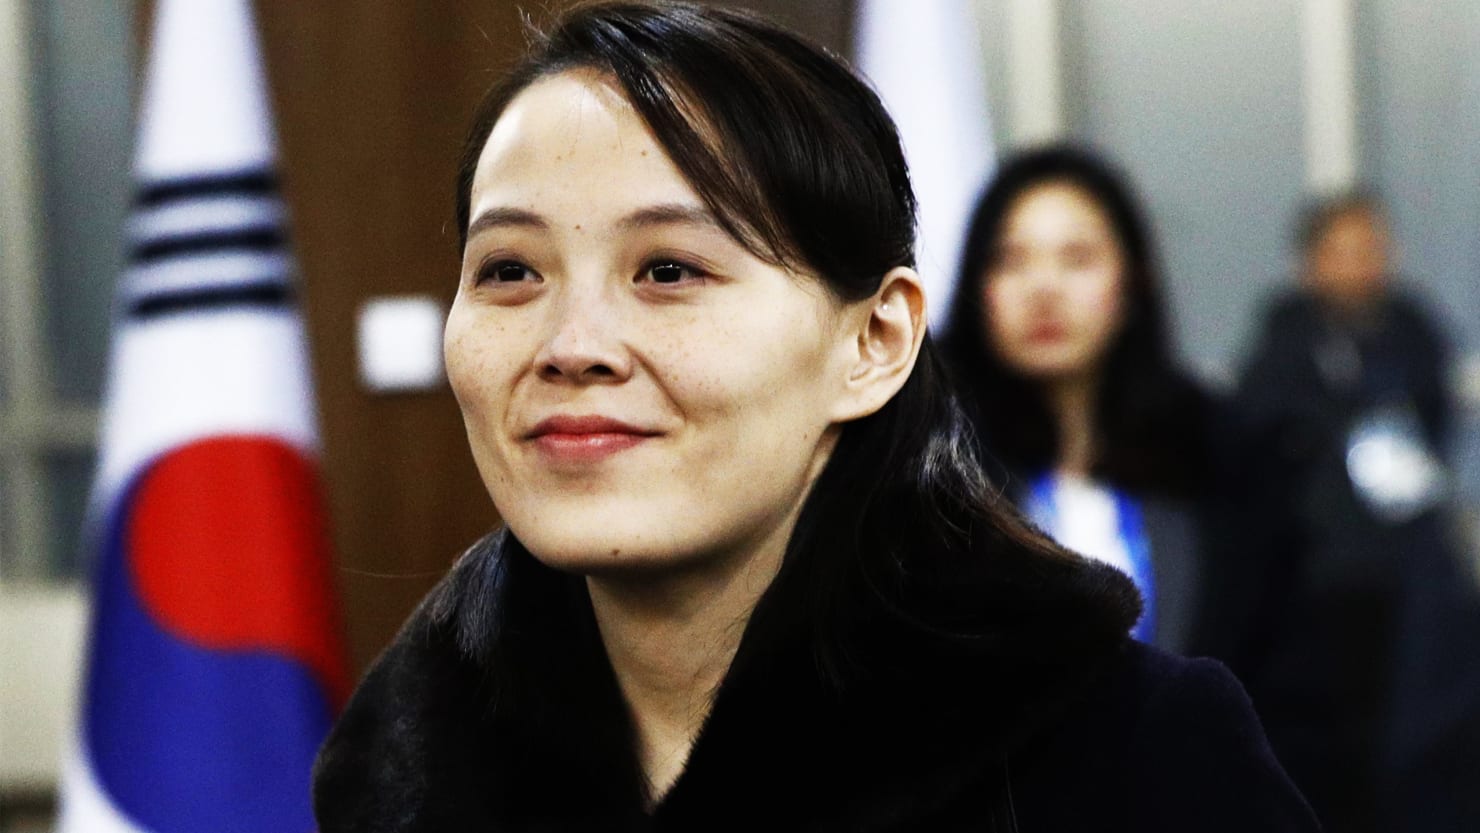 Kim Yo Jong is ready to become the first female dictator in modern history